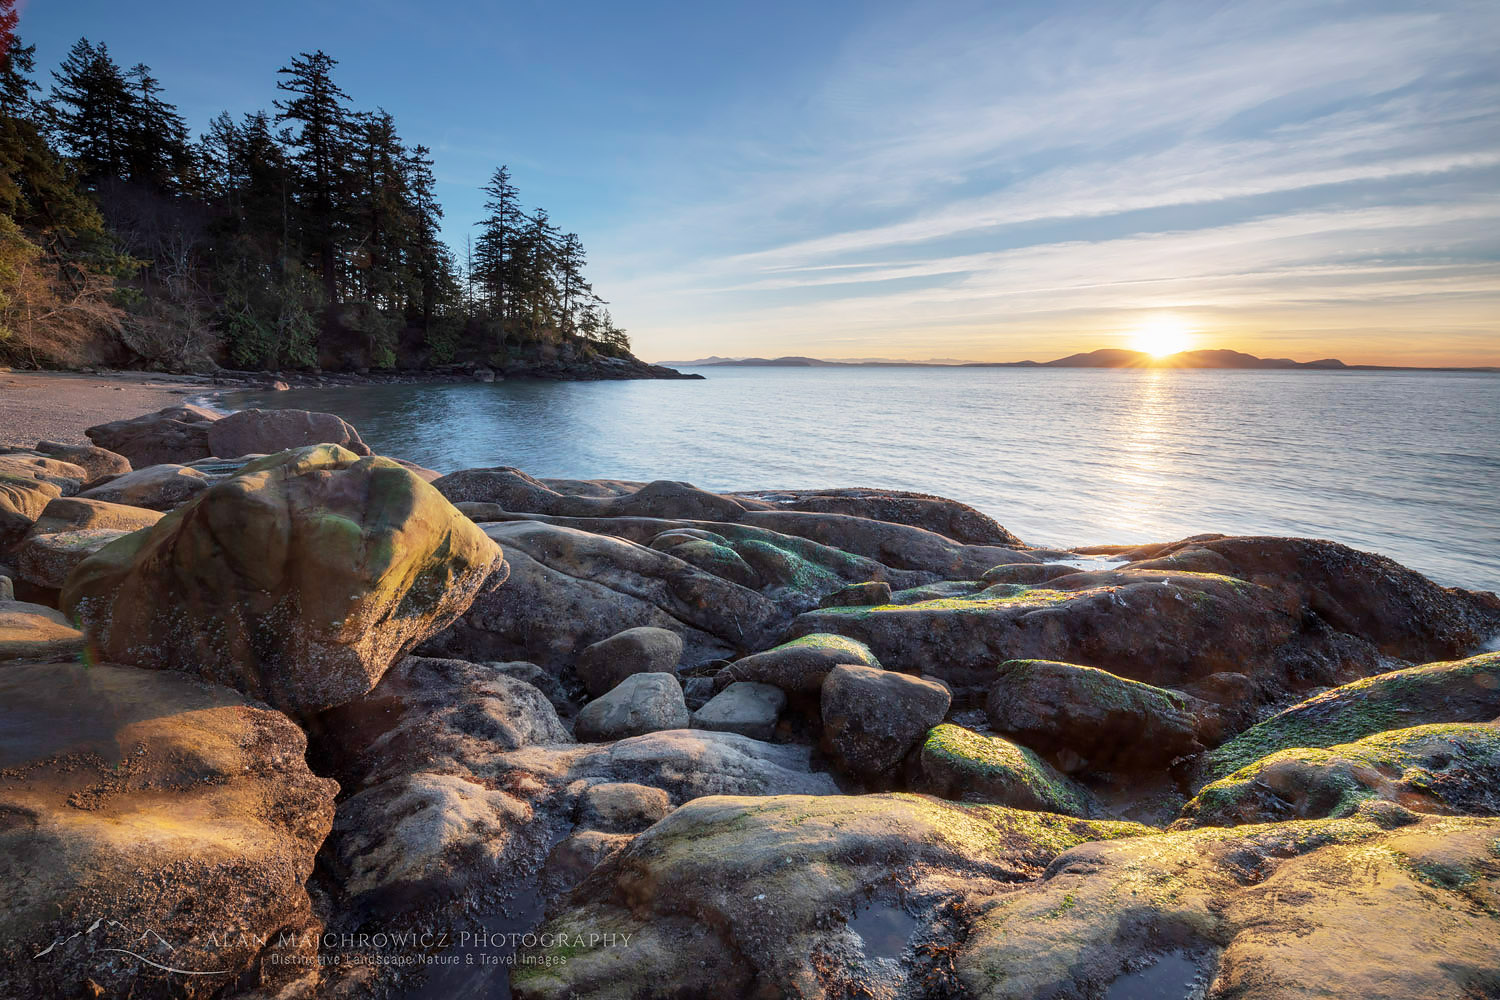 Sunset at Wildcat Cove, looking out to Samish Bay and the San Juan Islands, Larrabee State Park Washington #64680